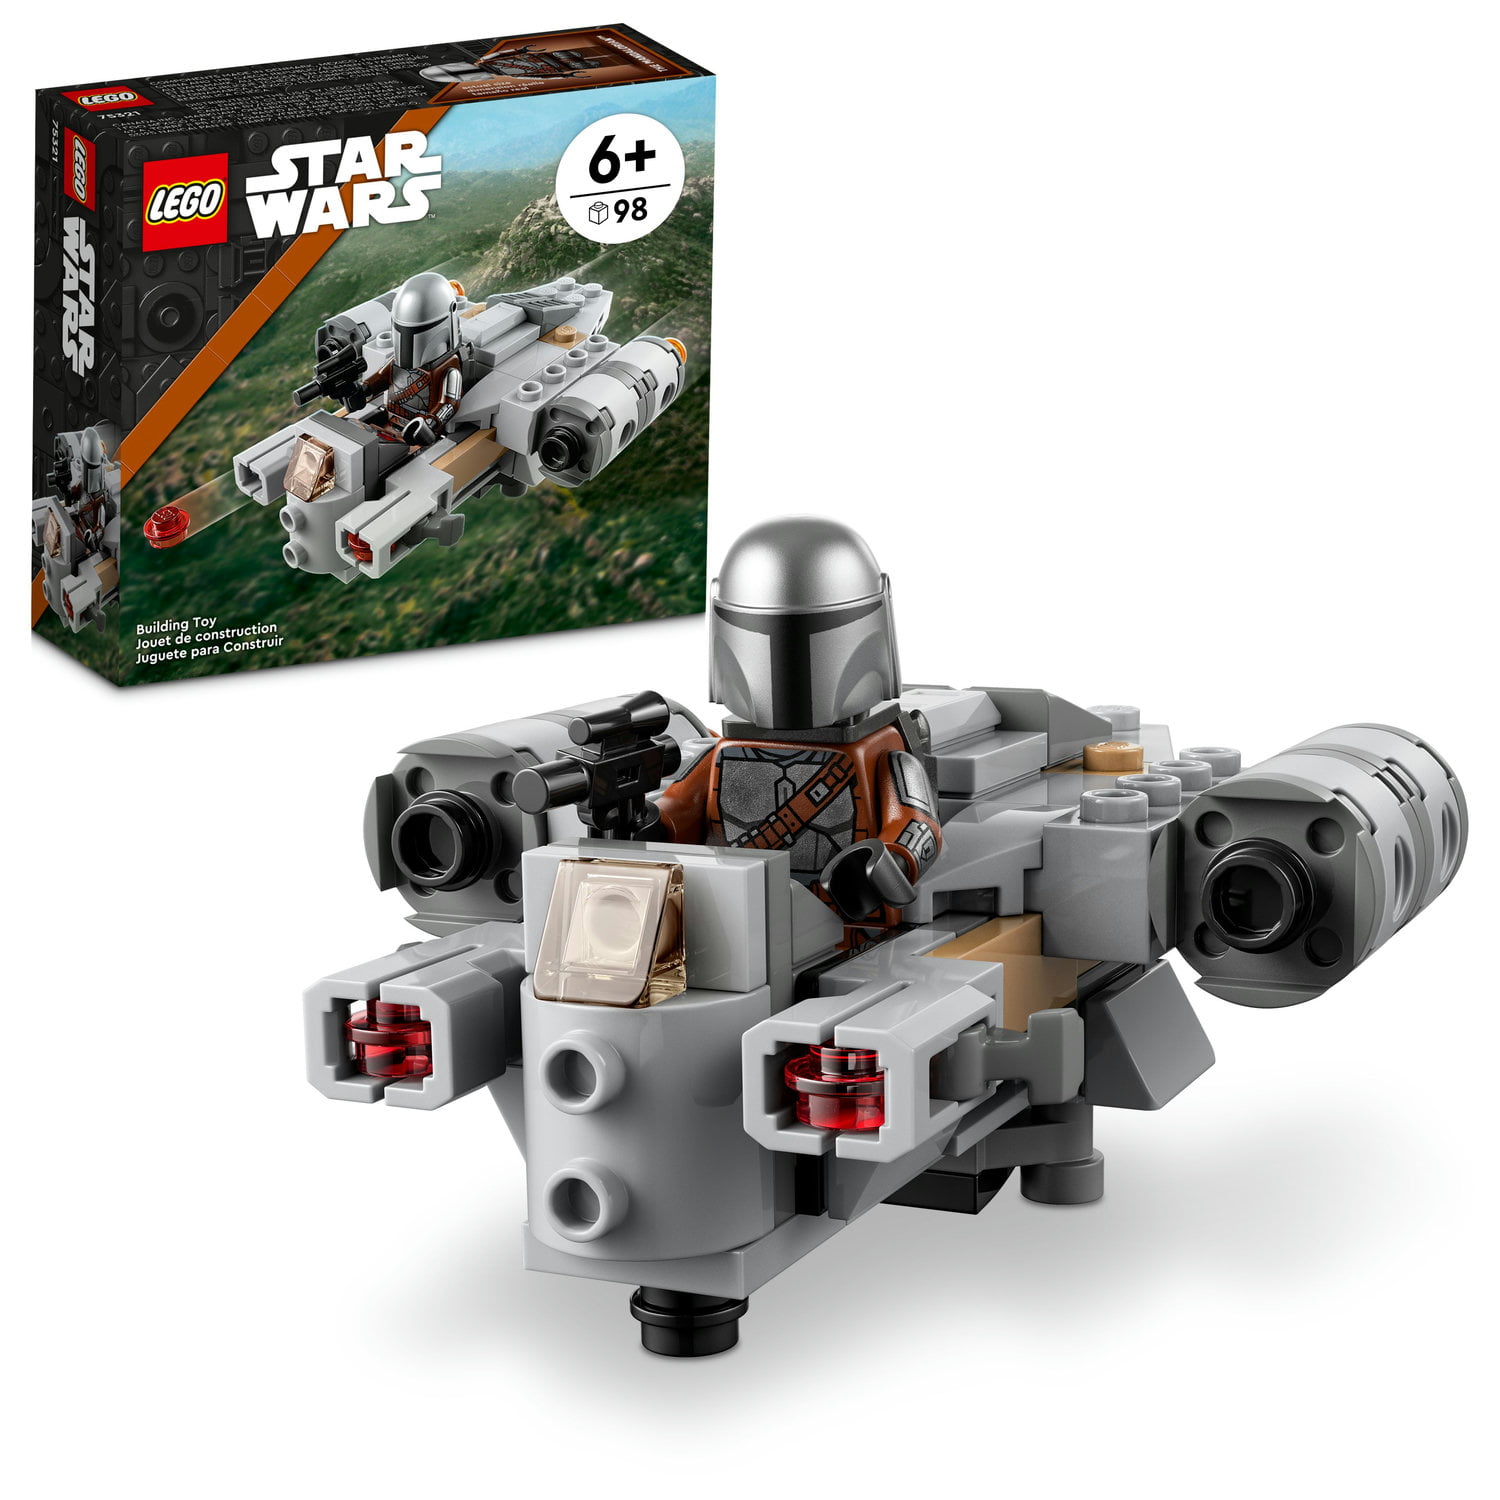 Spider Robots Building Blocks Compatible With Lego Star Wars  Star wars free shi 